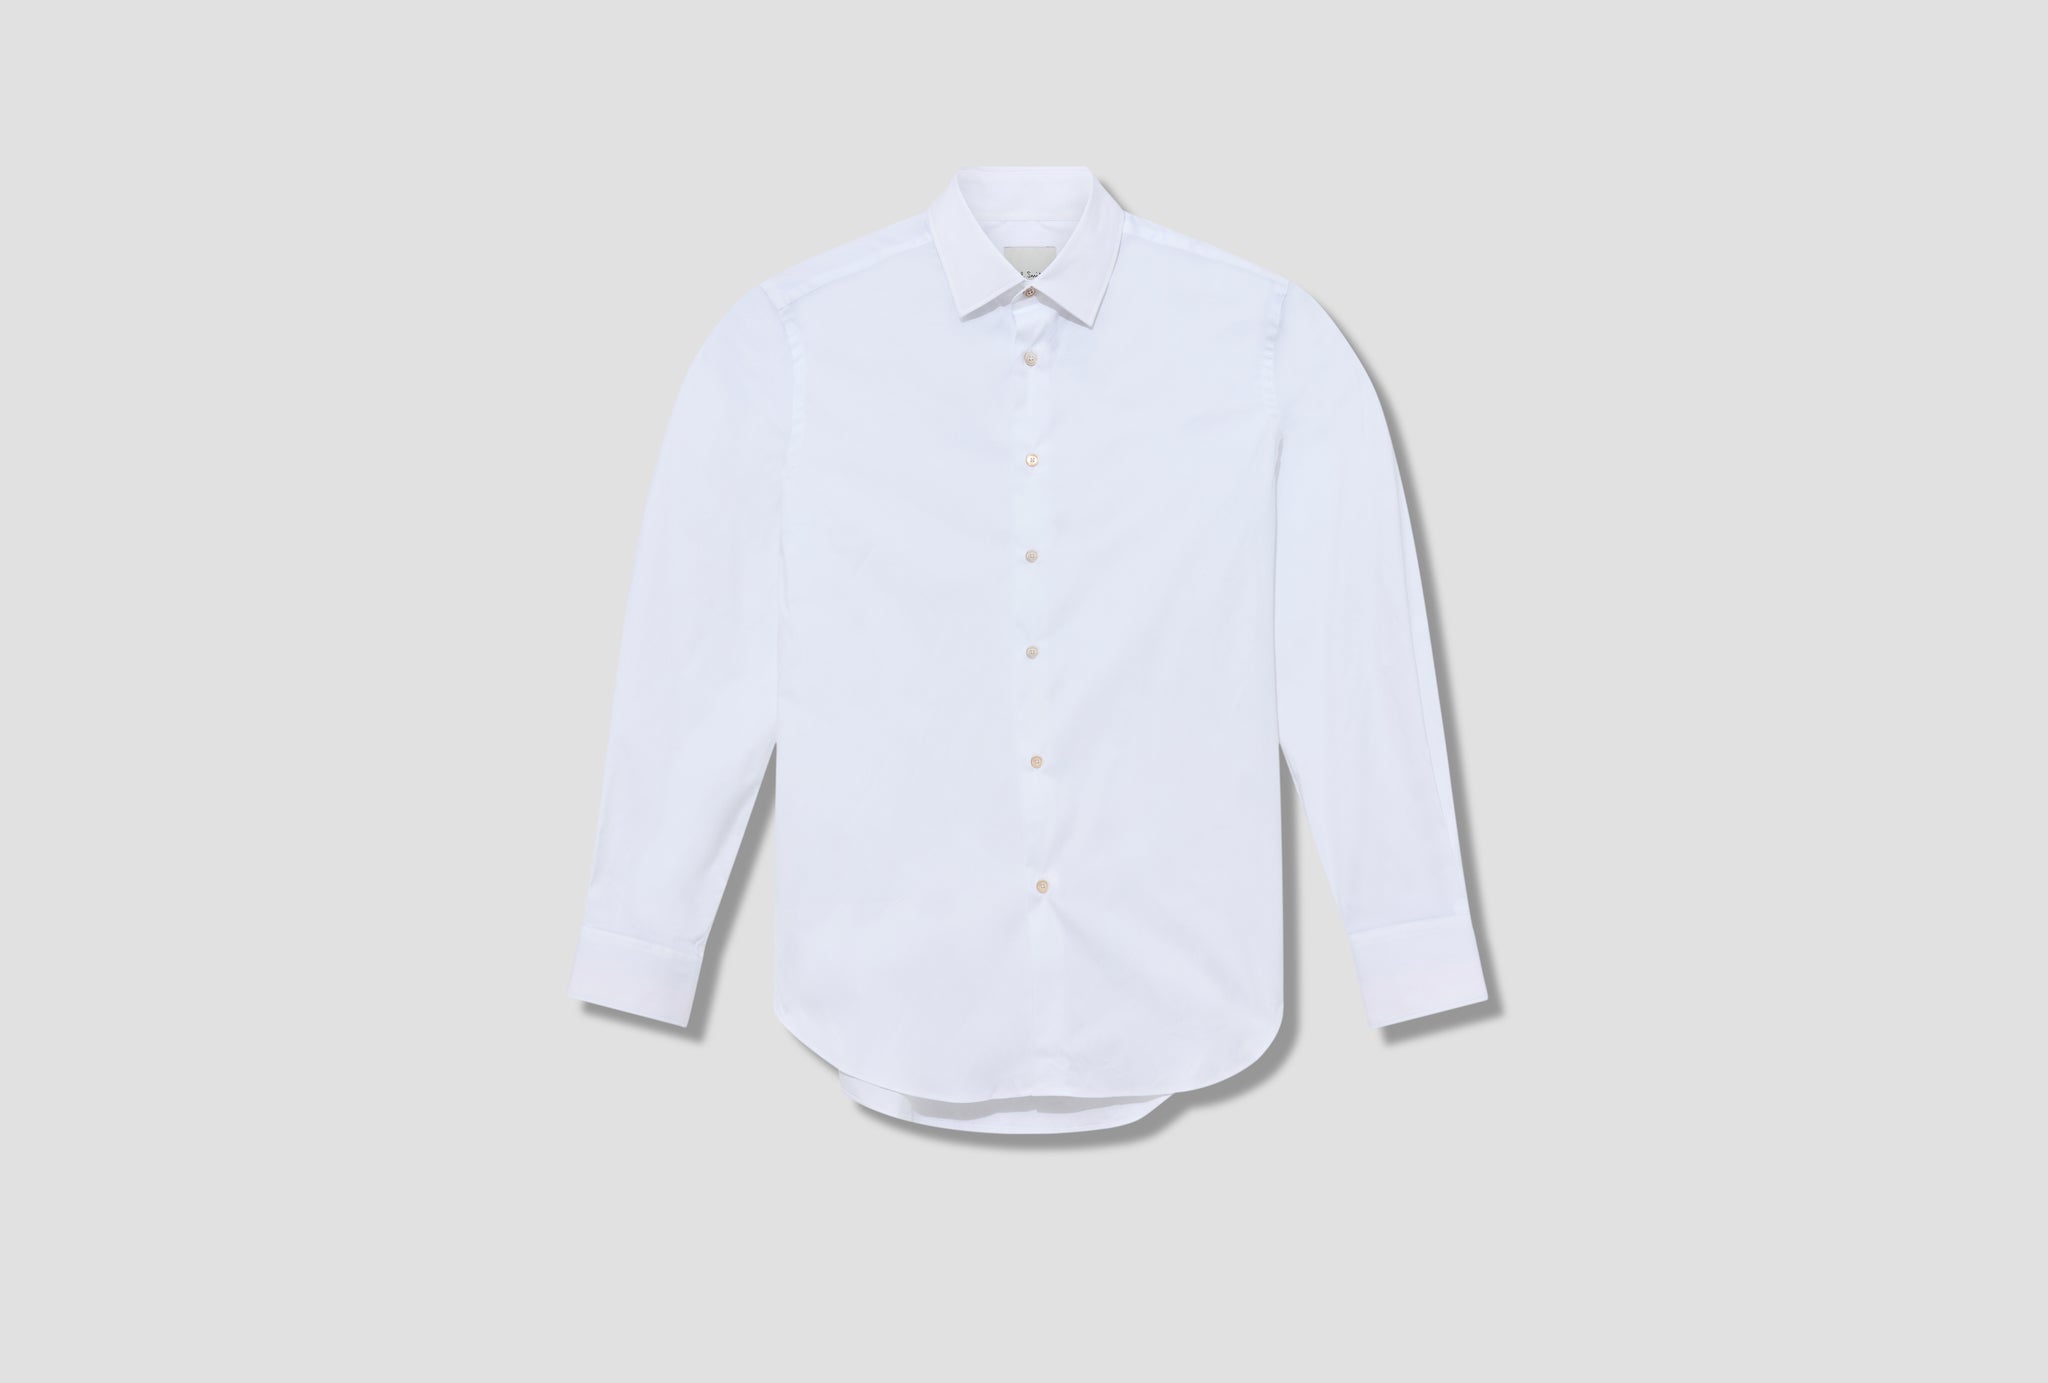 MENS S/C TAILORED FIT SHIRT M1R-800P3-H00051 White